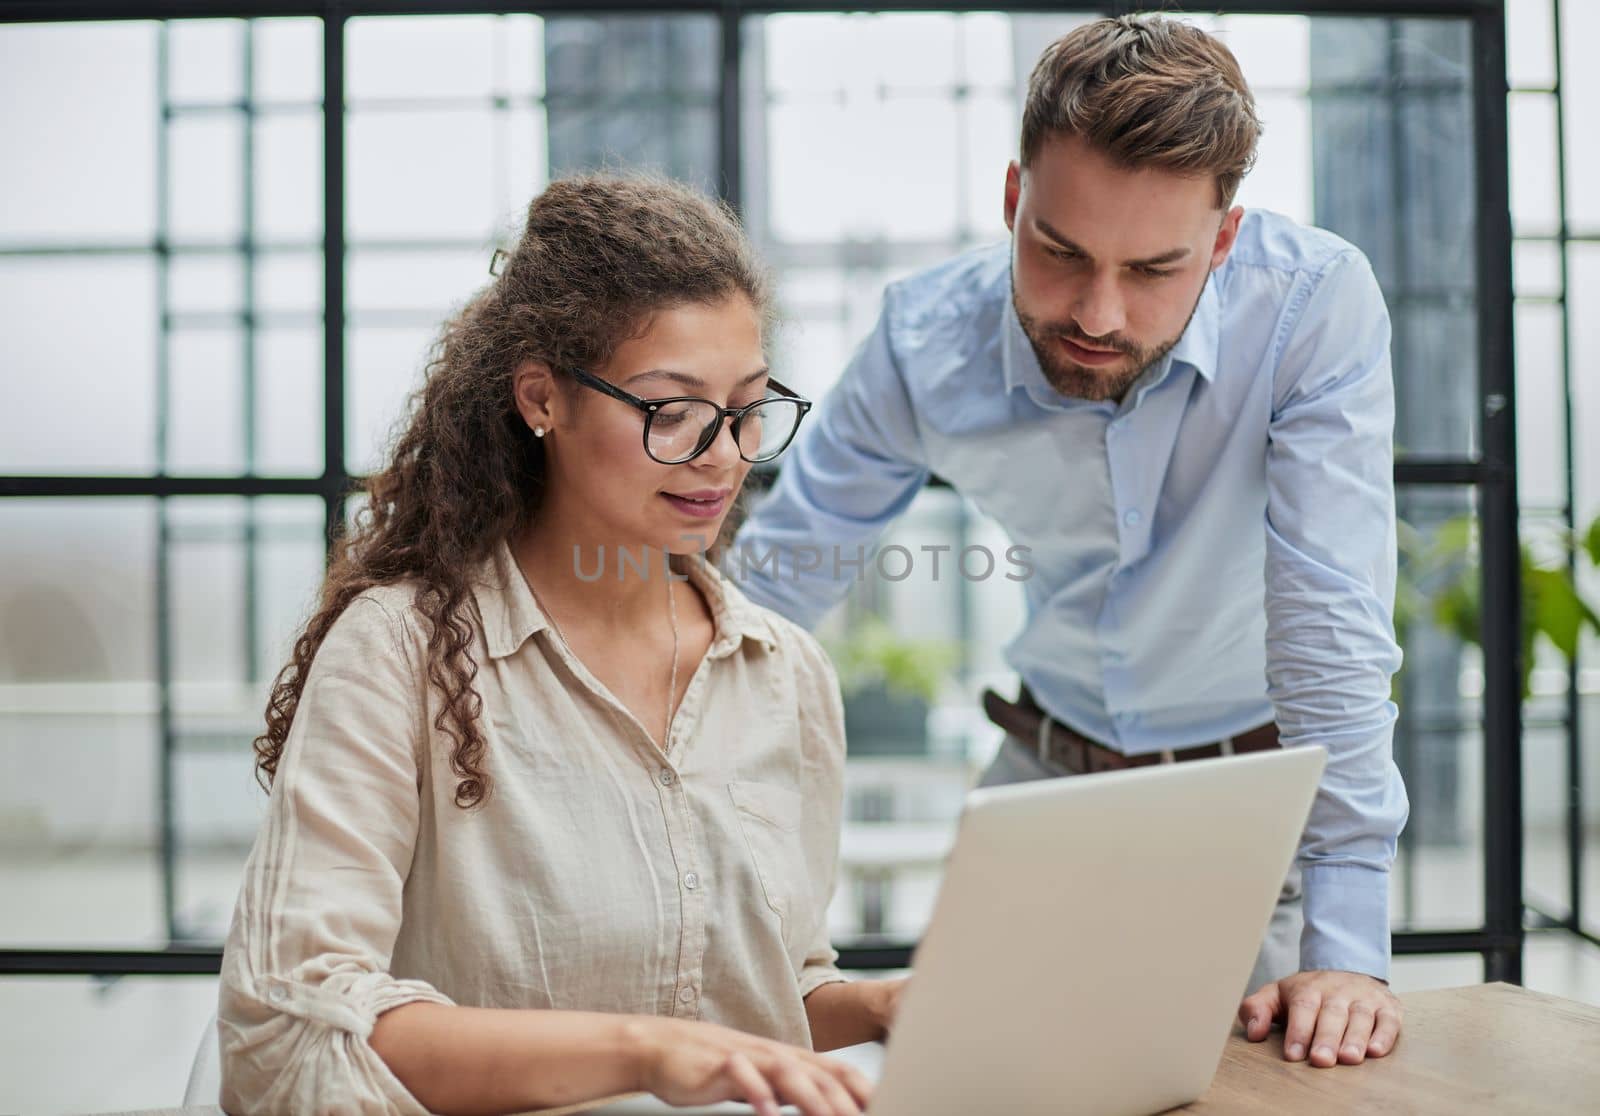 Colleagues check documents using a laptop. A man and a woman are sitting together looking at a laptop. business concept